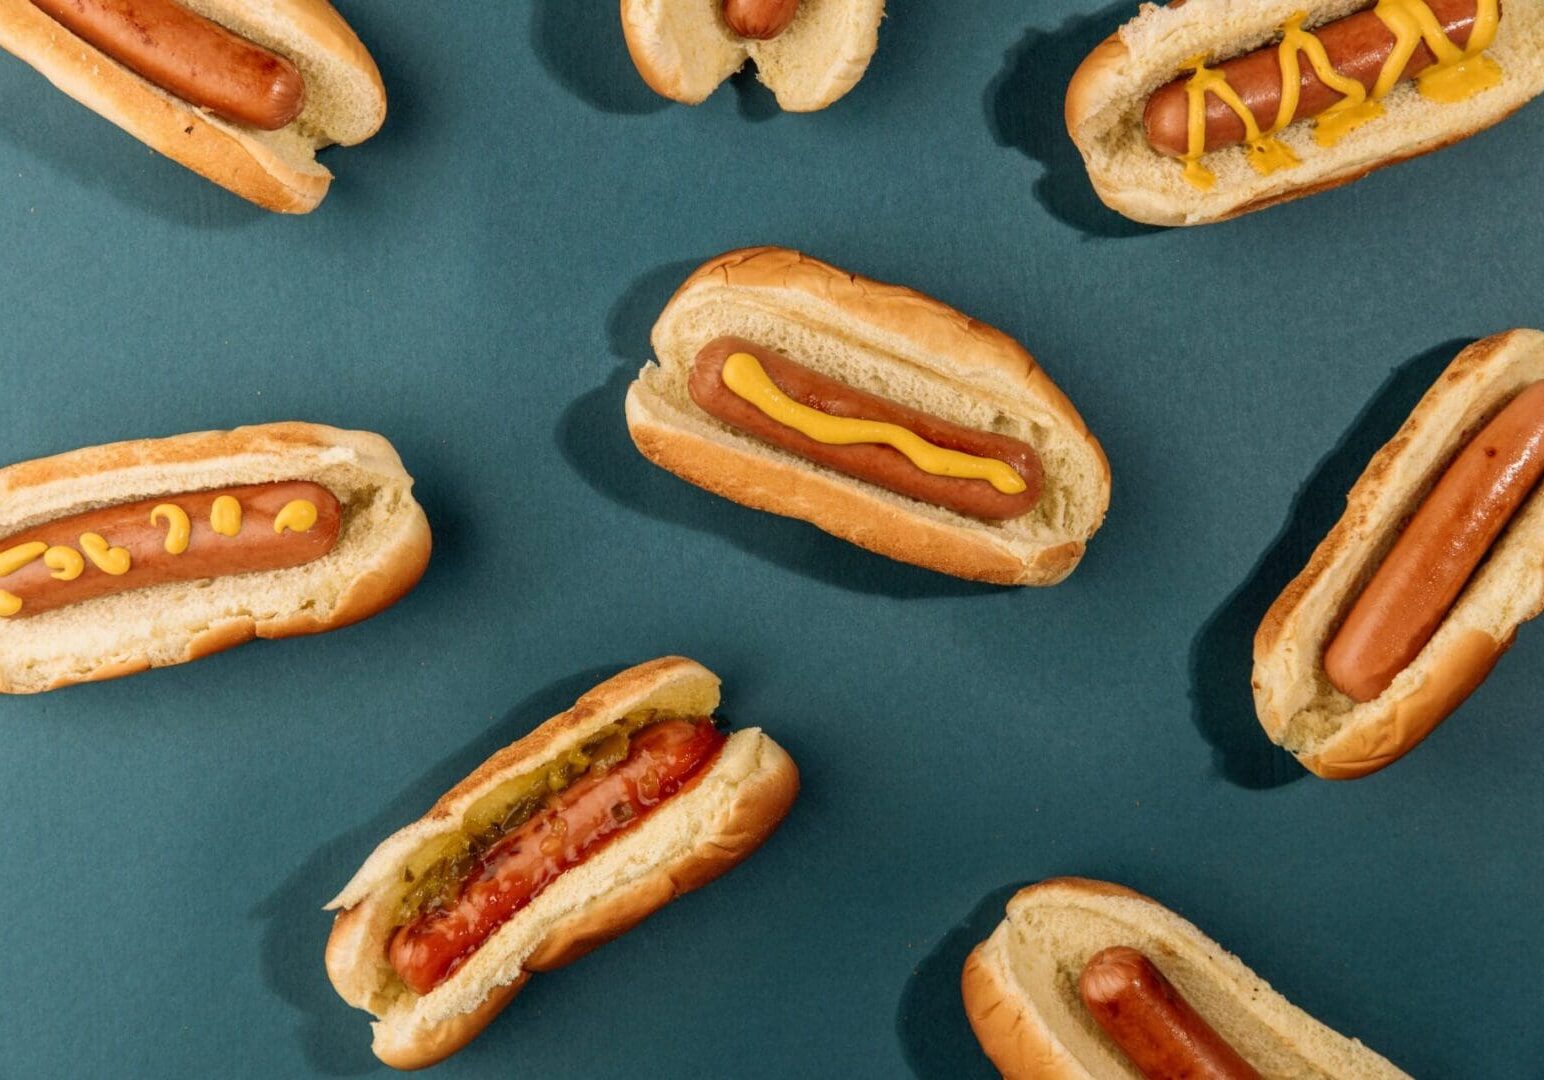 A bunch of hot dogs are on the table